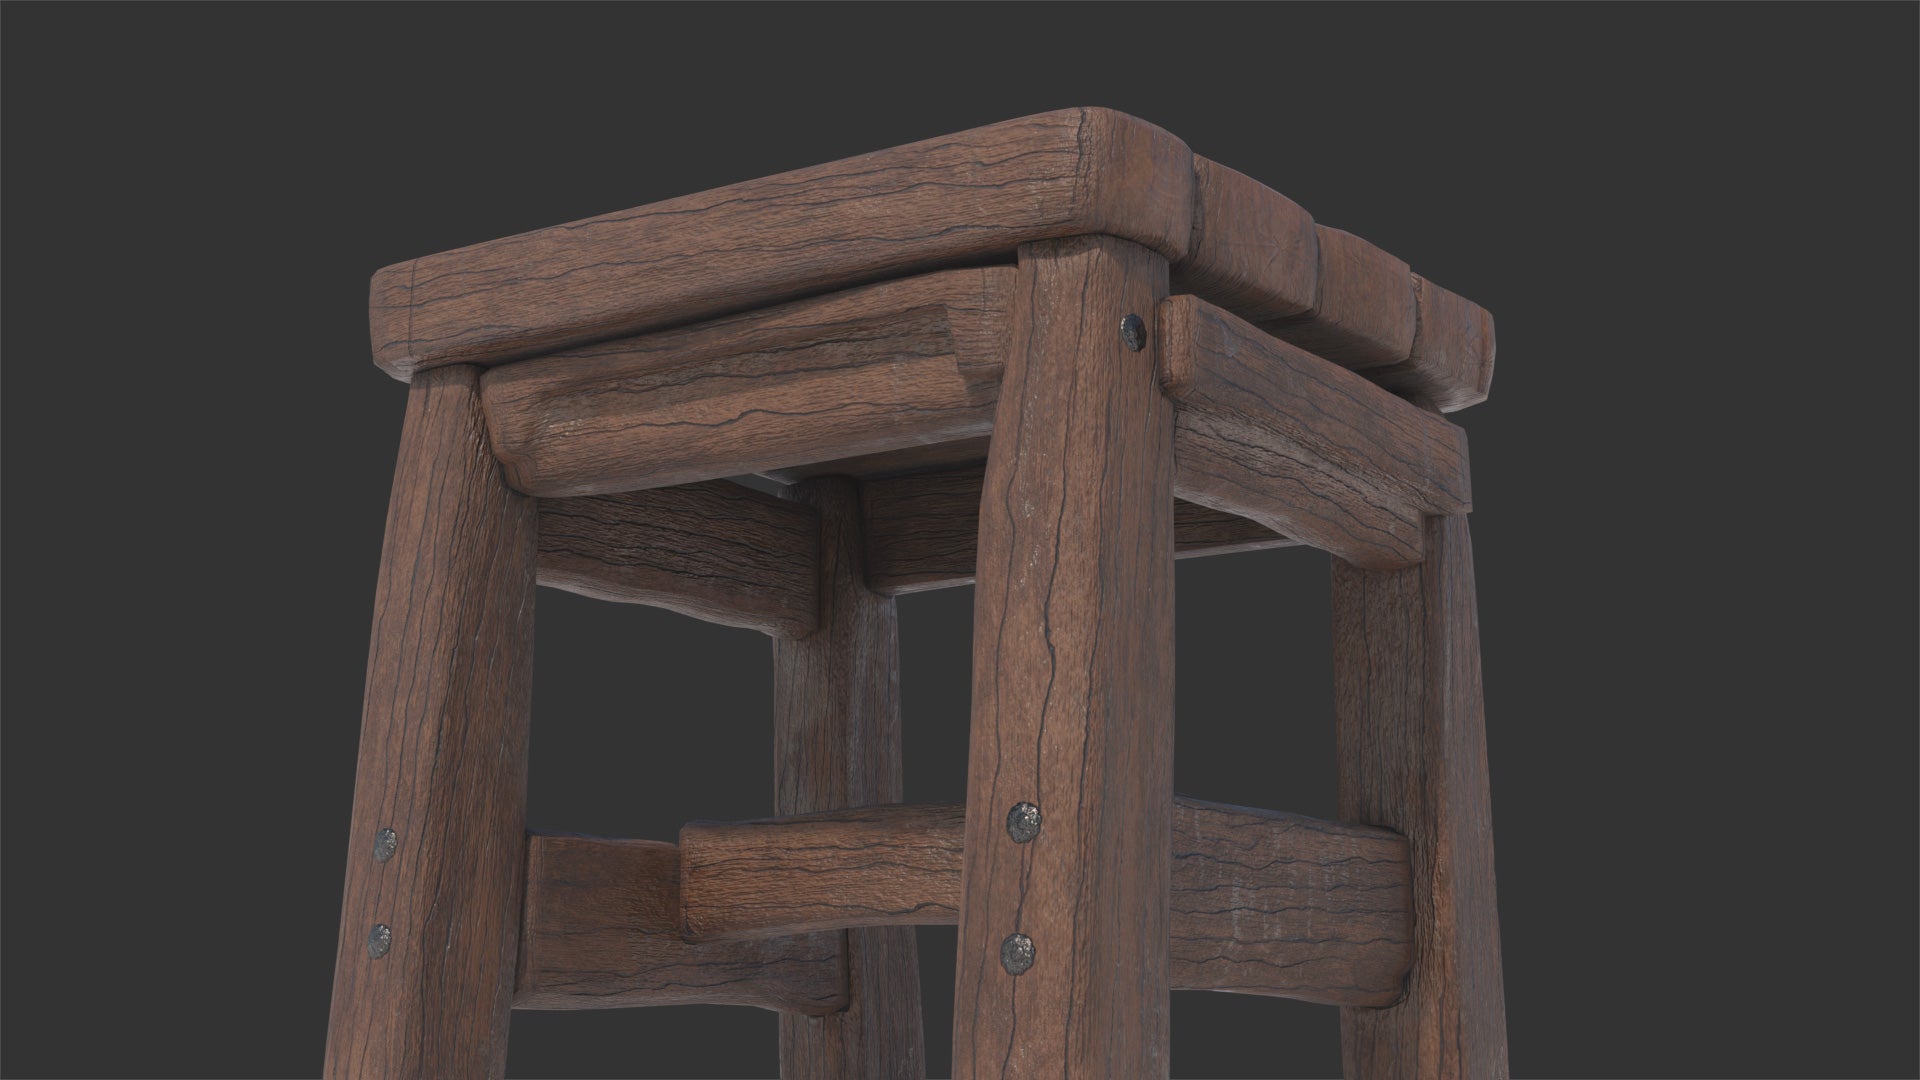 3D model of a rustic wooden stool, short and rough, looks handmade and it would fit well in a medieval setting. It had low polycount and still looks very realistic!